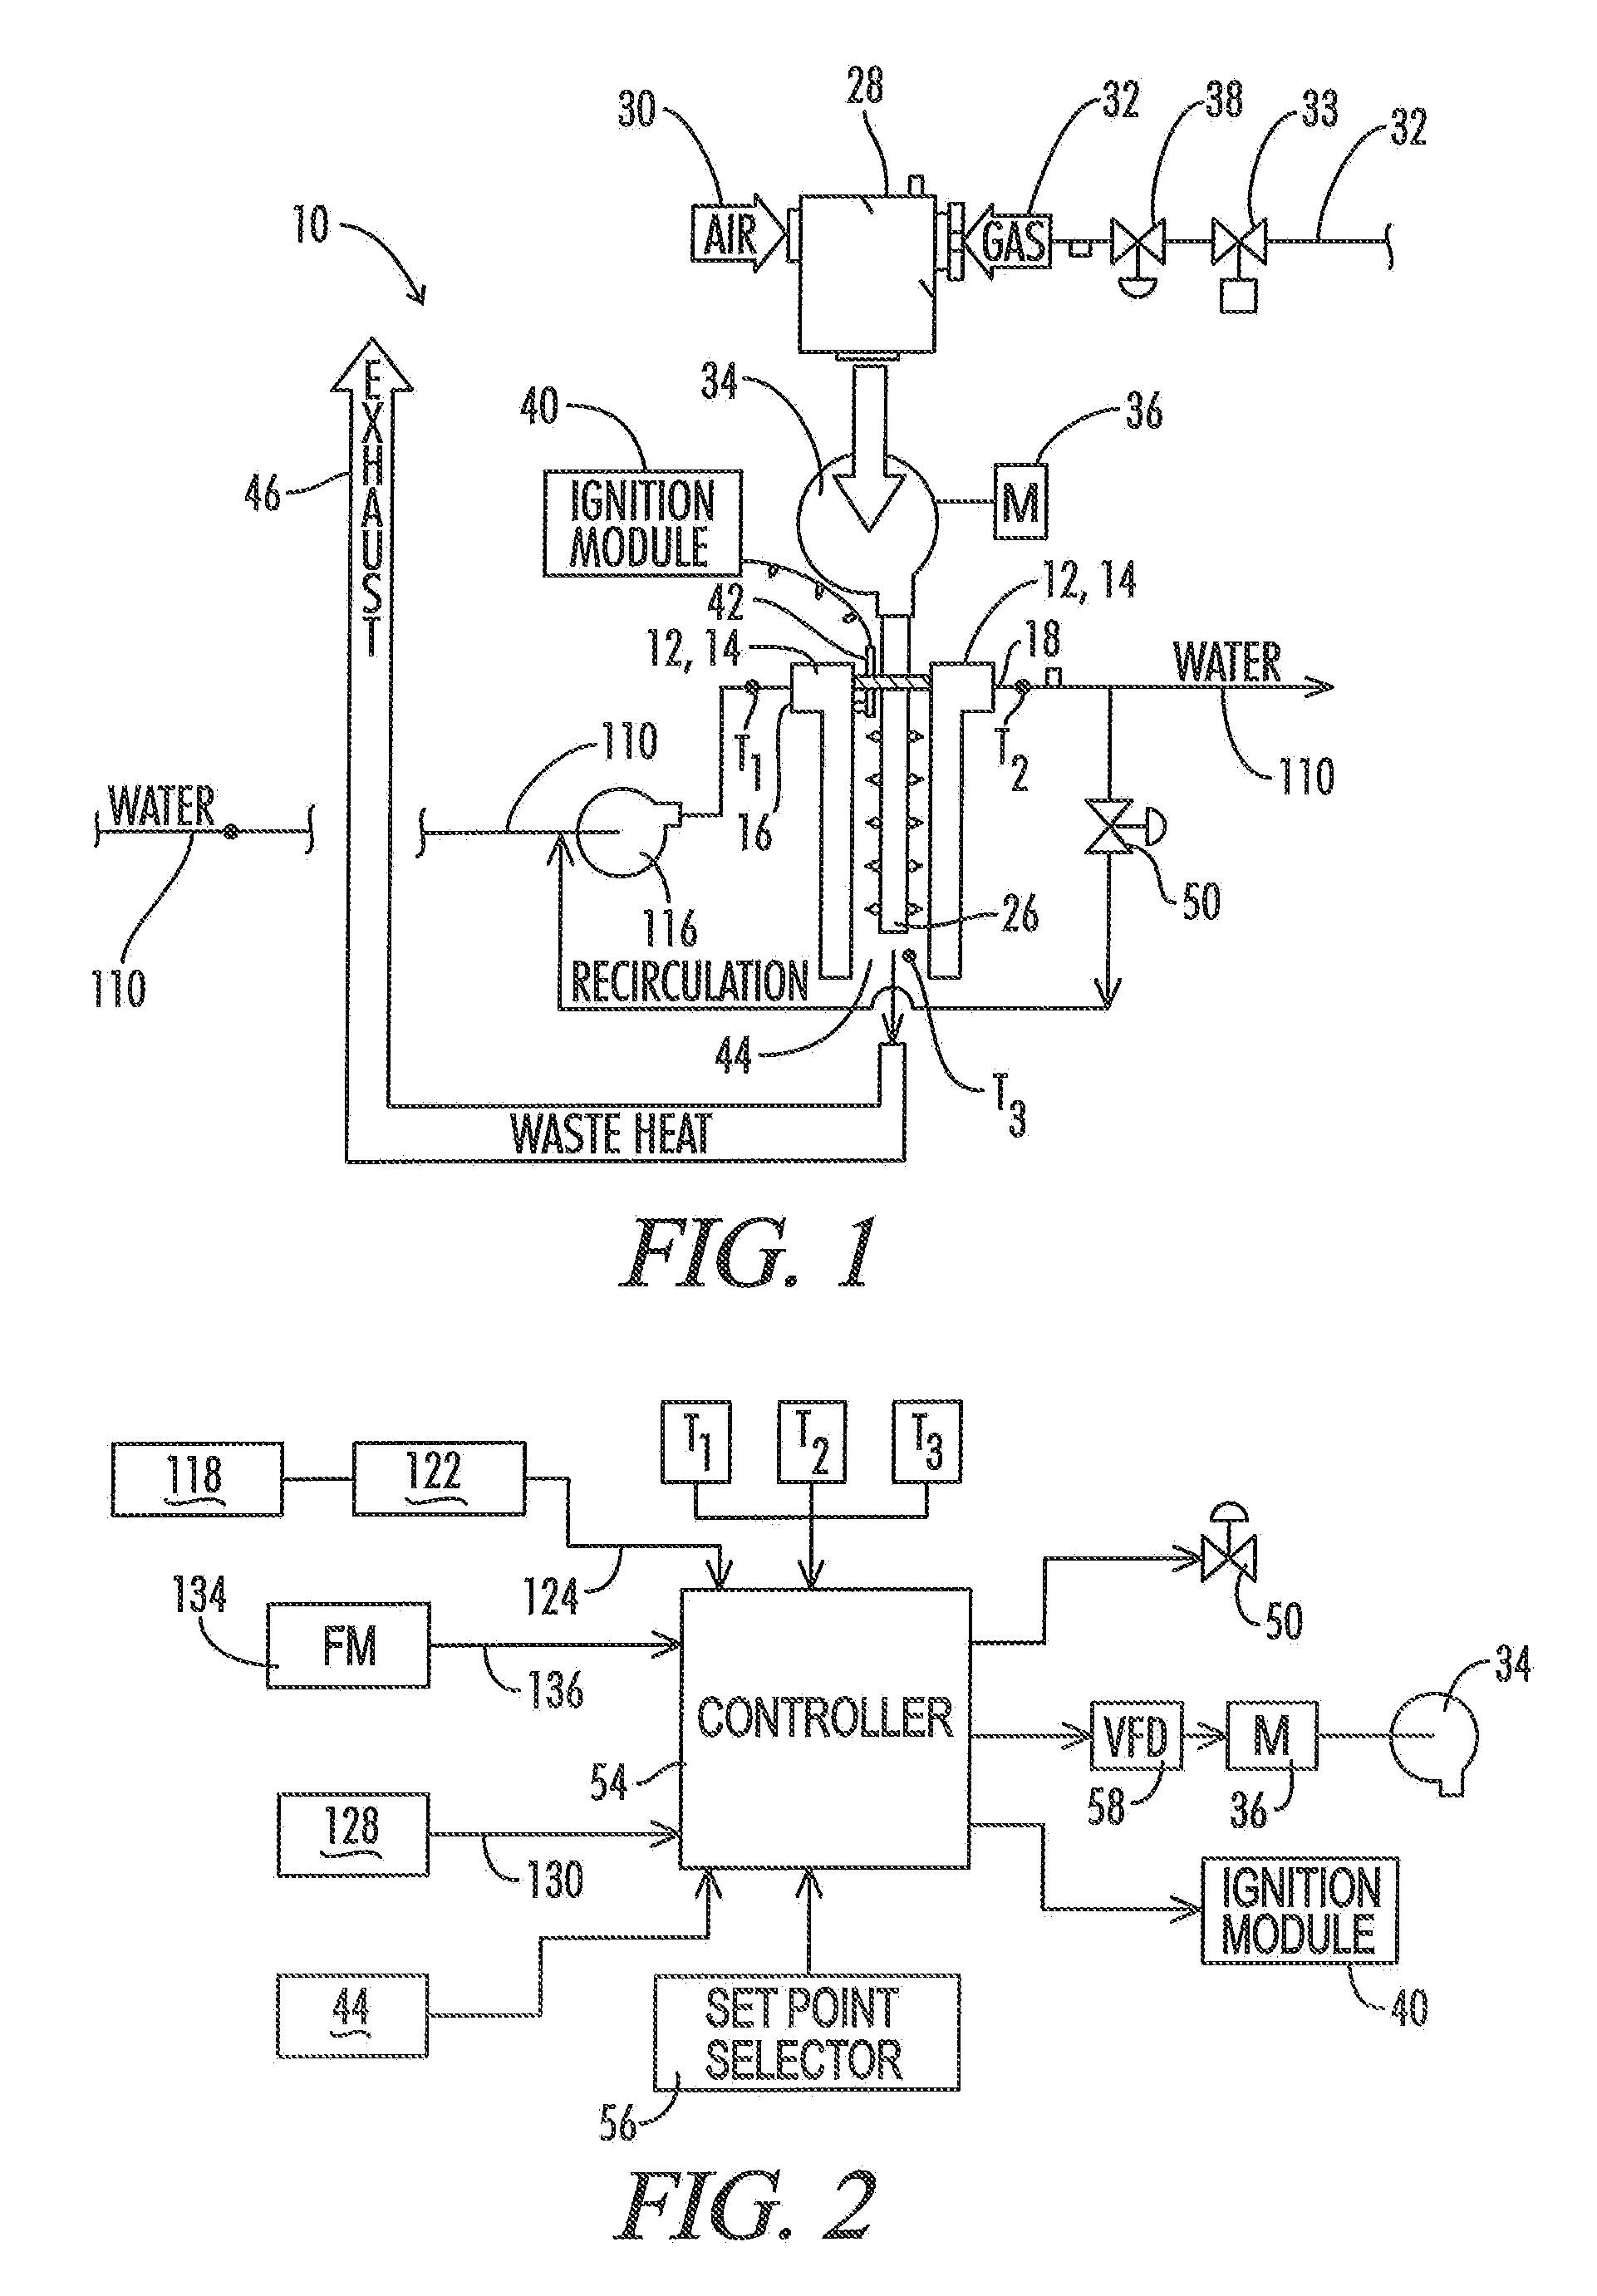 Control system for modulating water heater